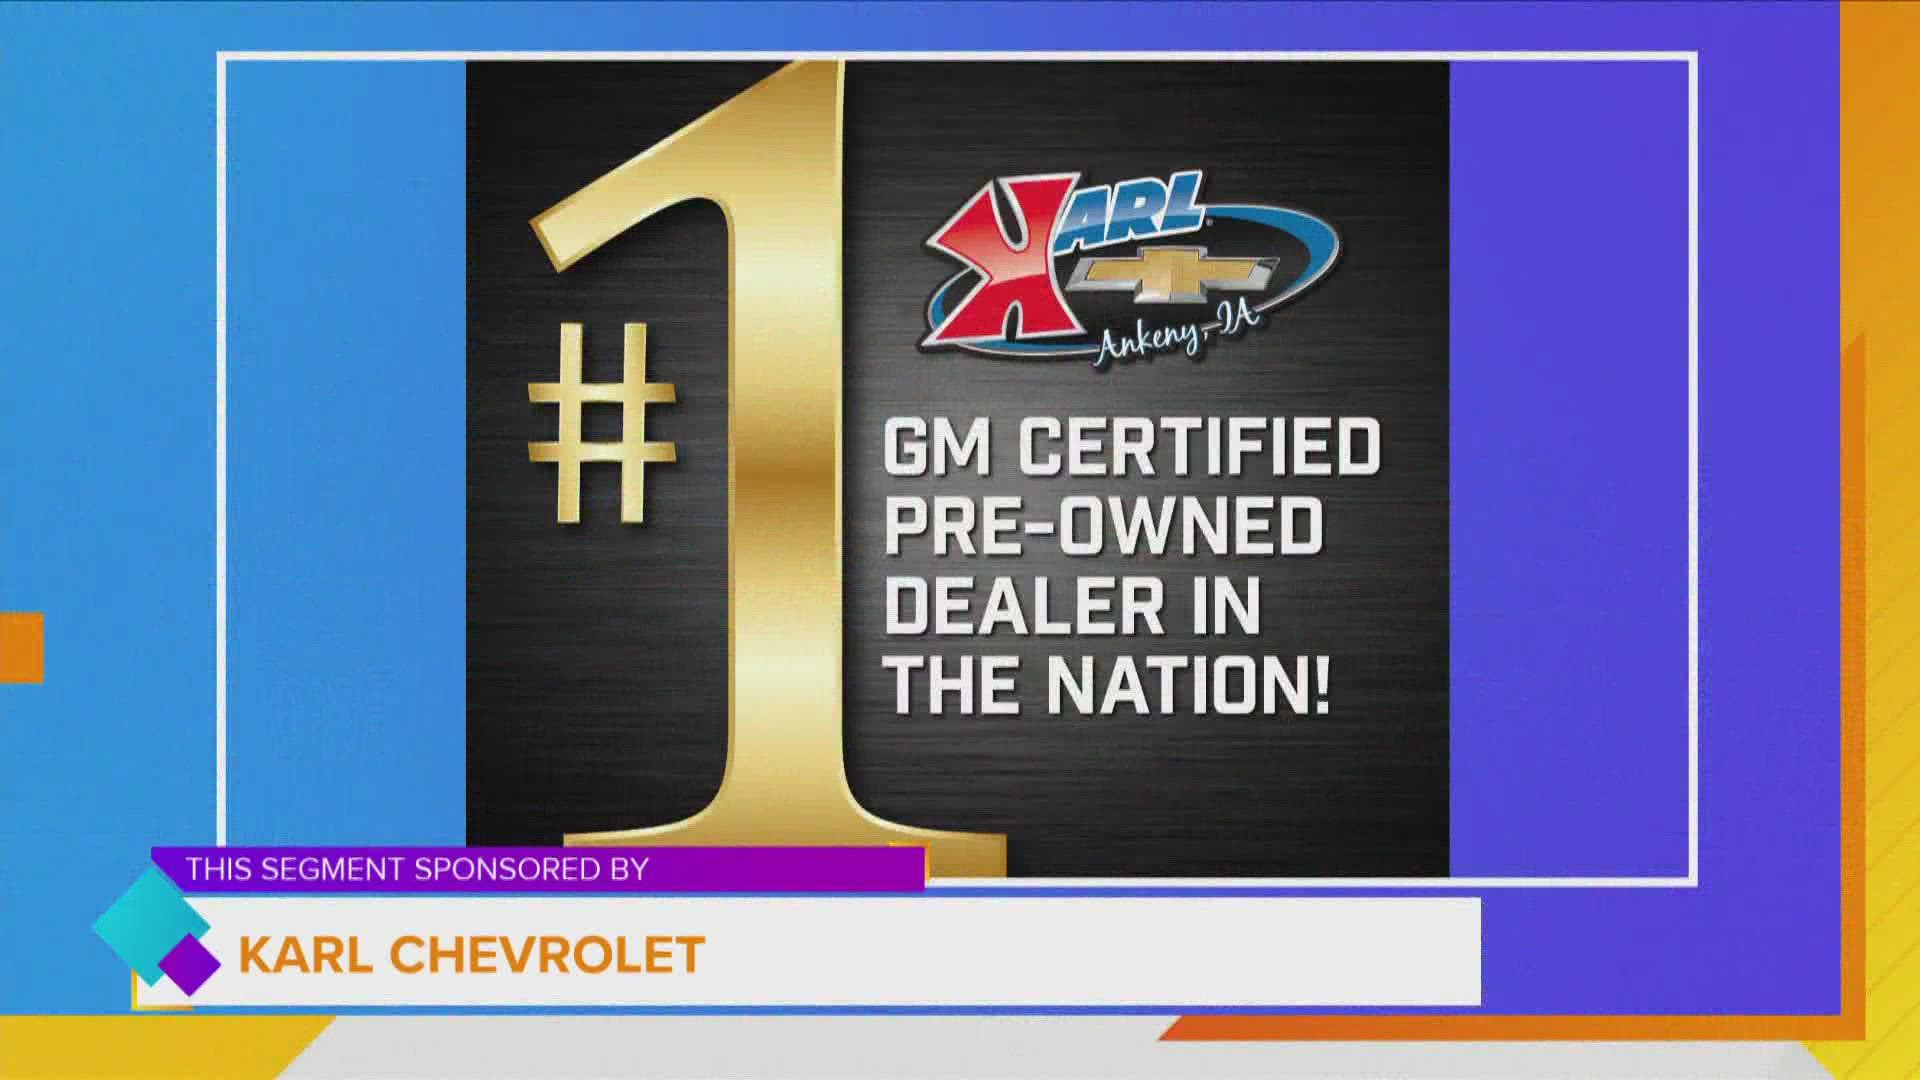 Karl Chevrolet is proud to announce they are the #1 Dealer in the Nation for GM Certified Pre-Owned Vehicles as they celebrate 44 years in business | Paid Content